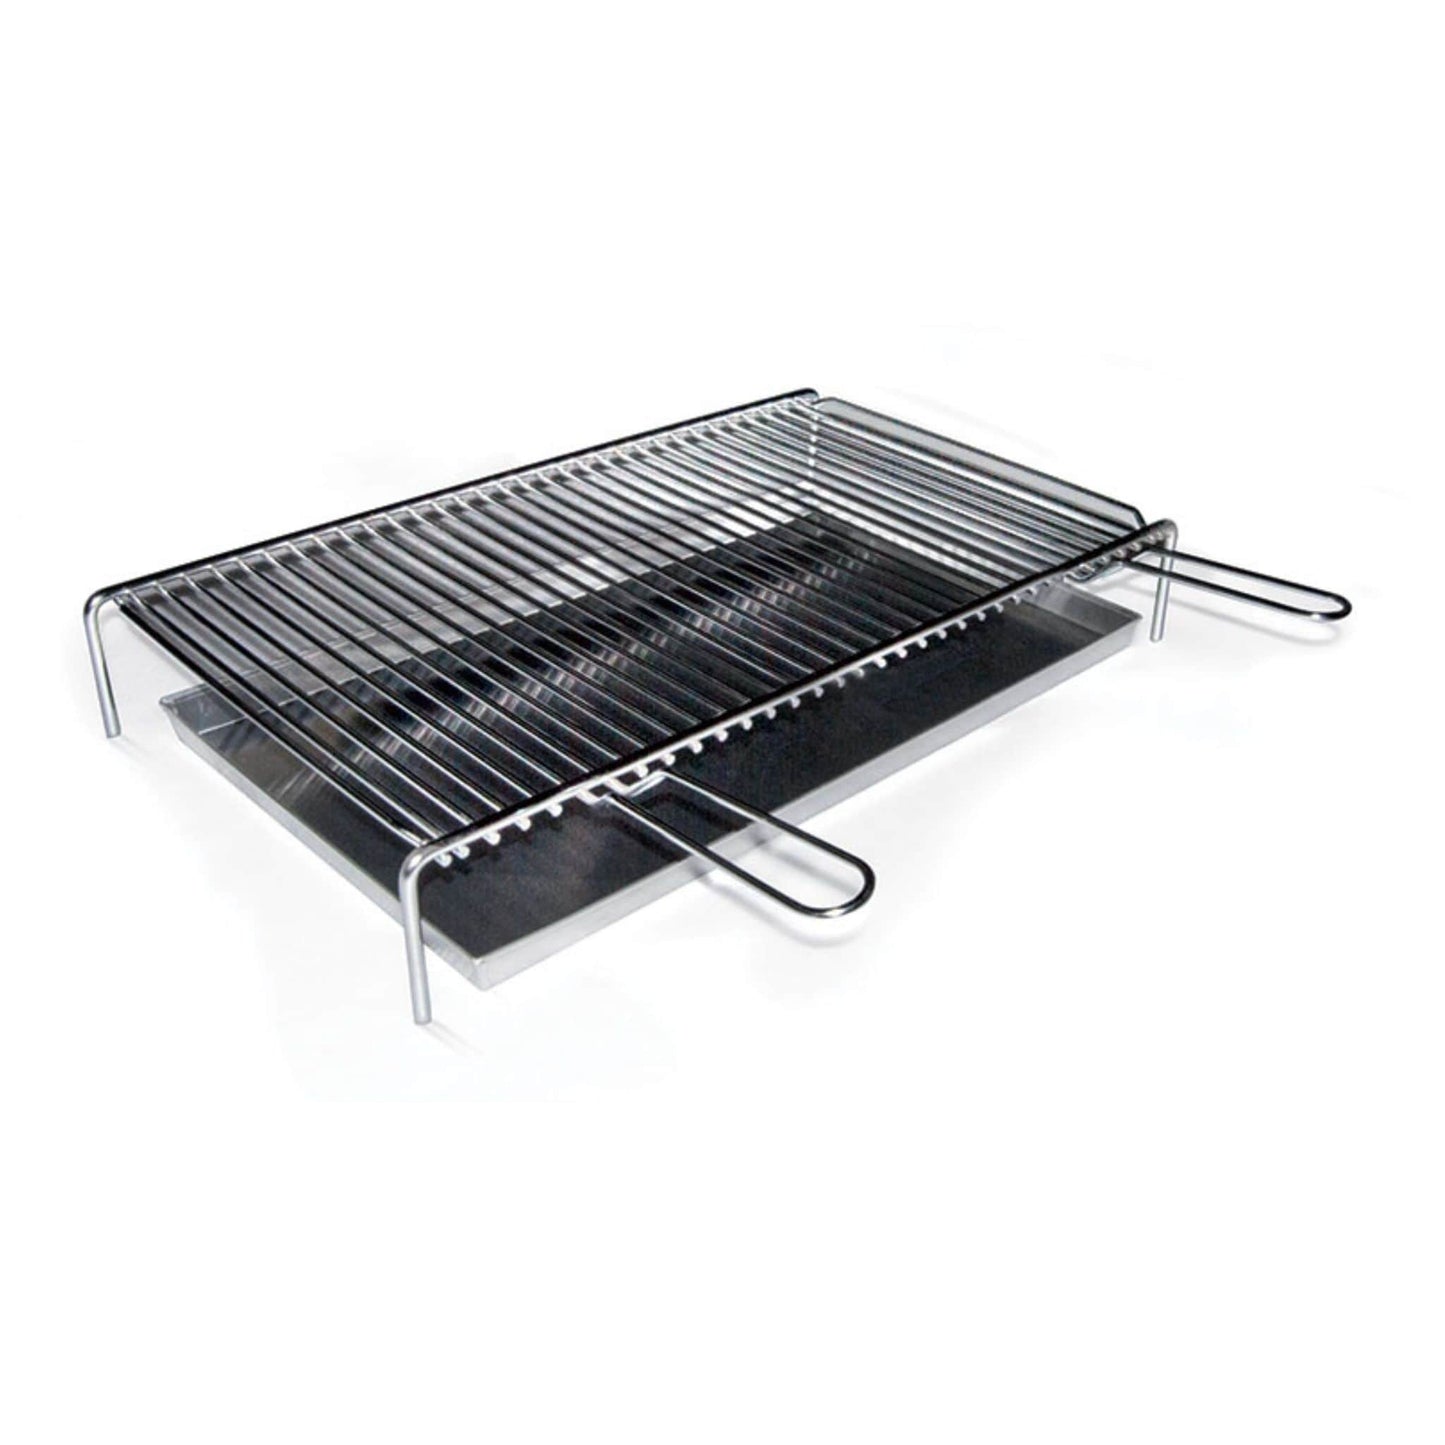 Fontana Stainless Steel Oven Grilling & Roasting Set